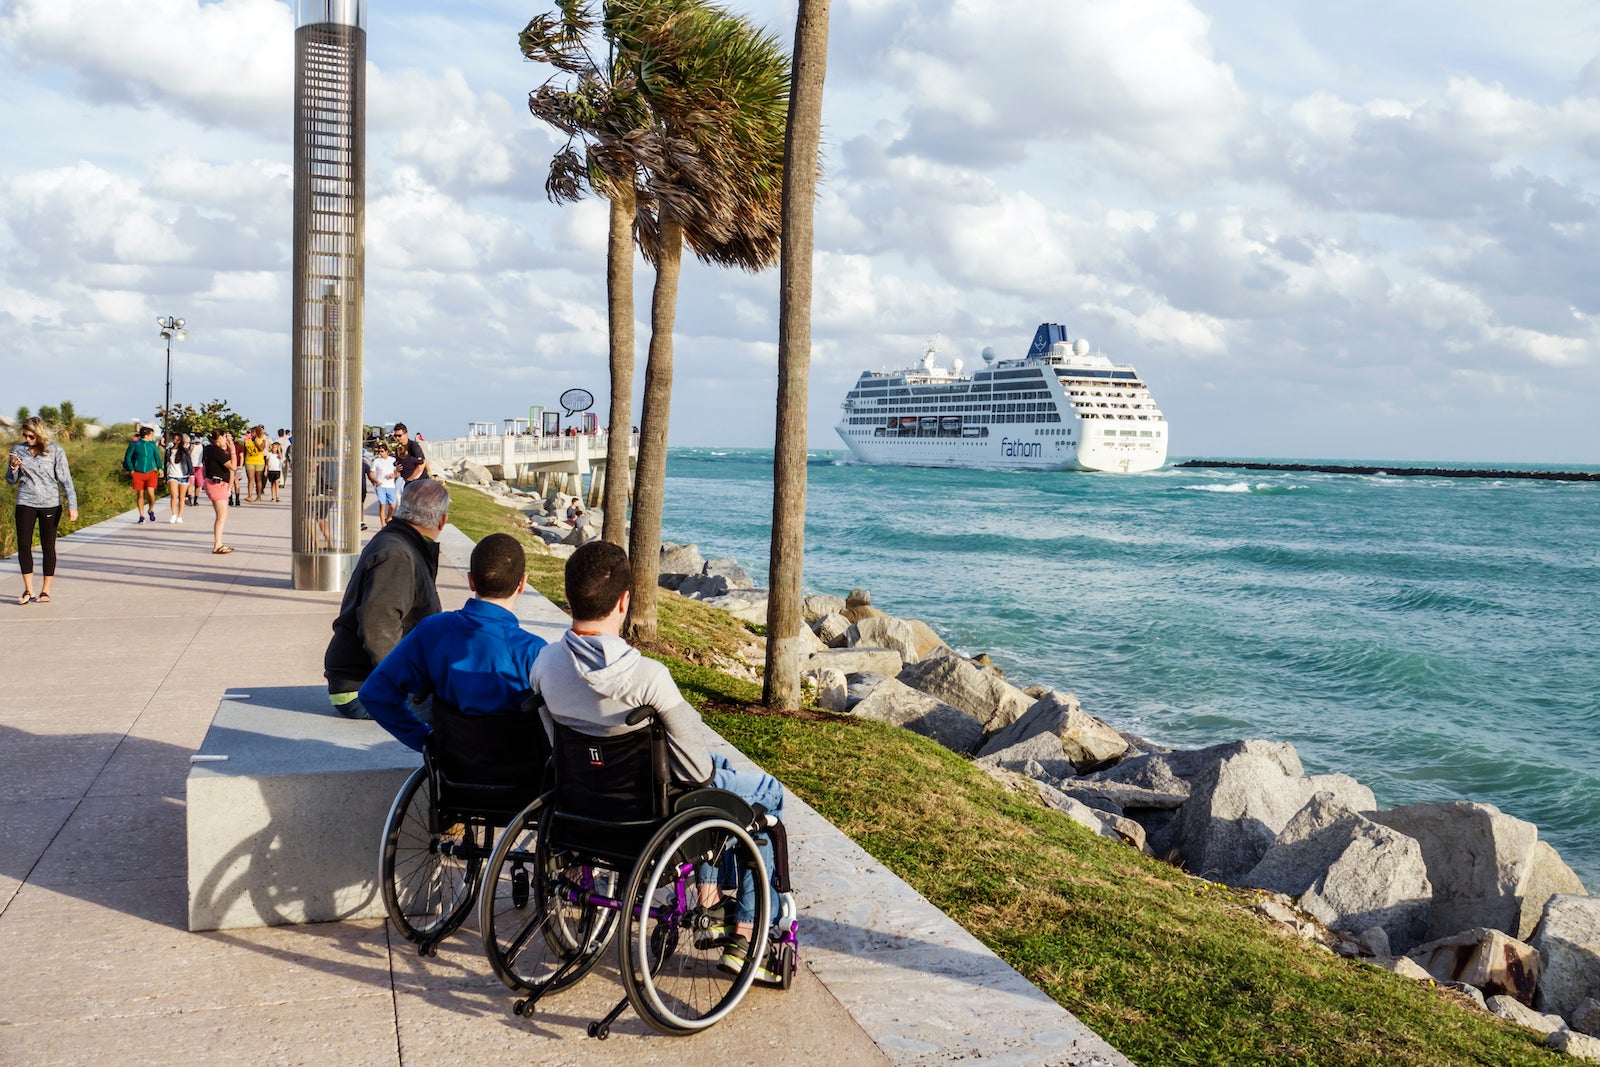 Miami Beach, Government Cut, Tourists in Wheelchair watching Cruise Ship